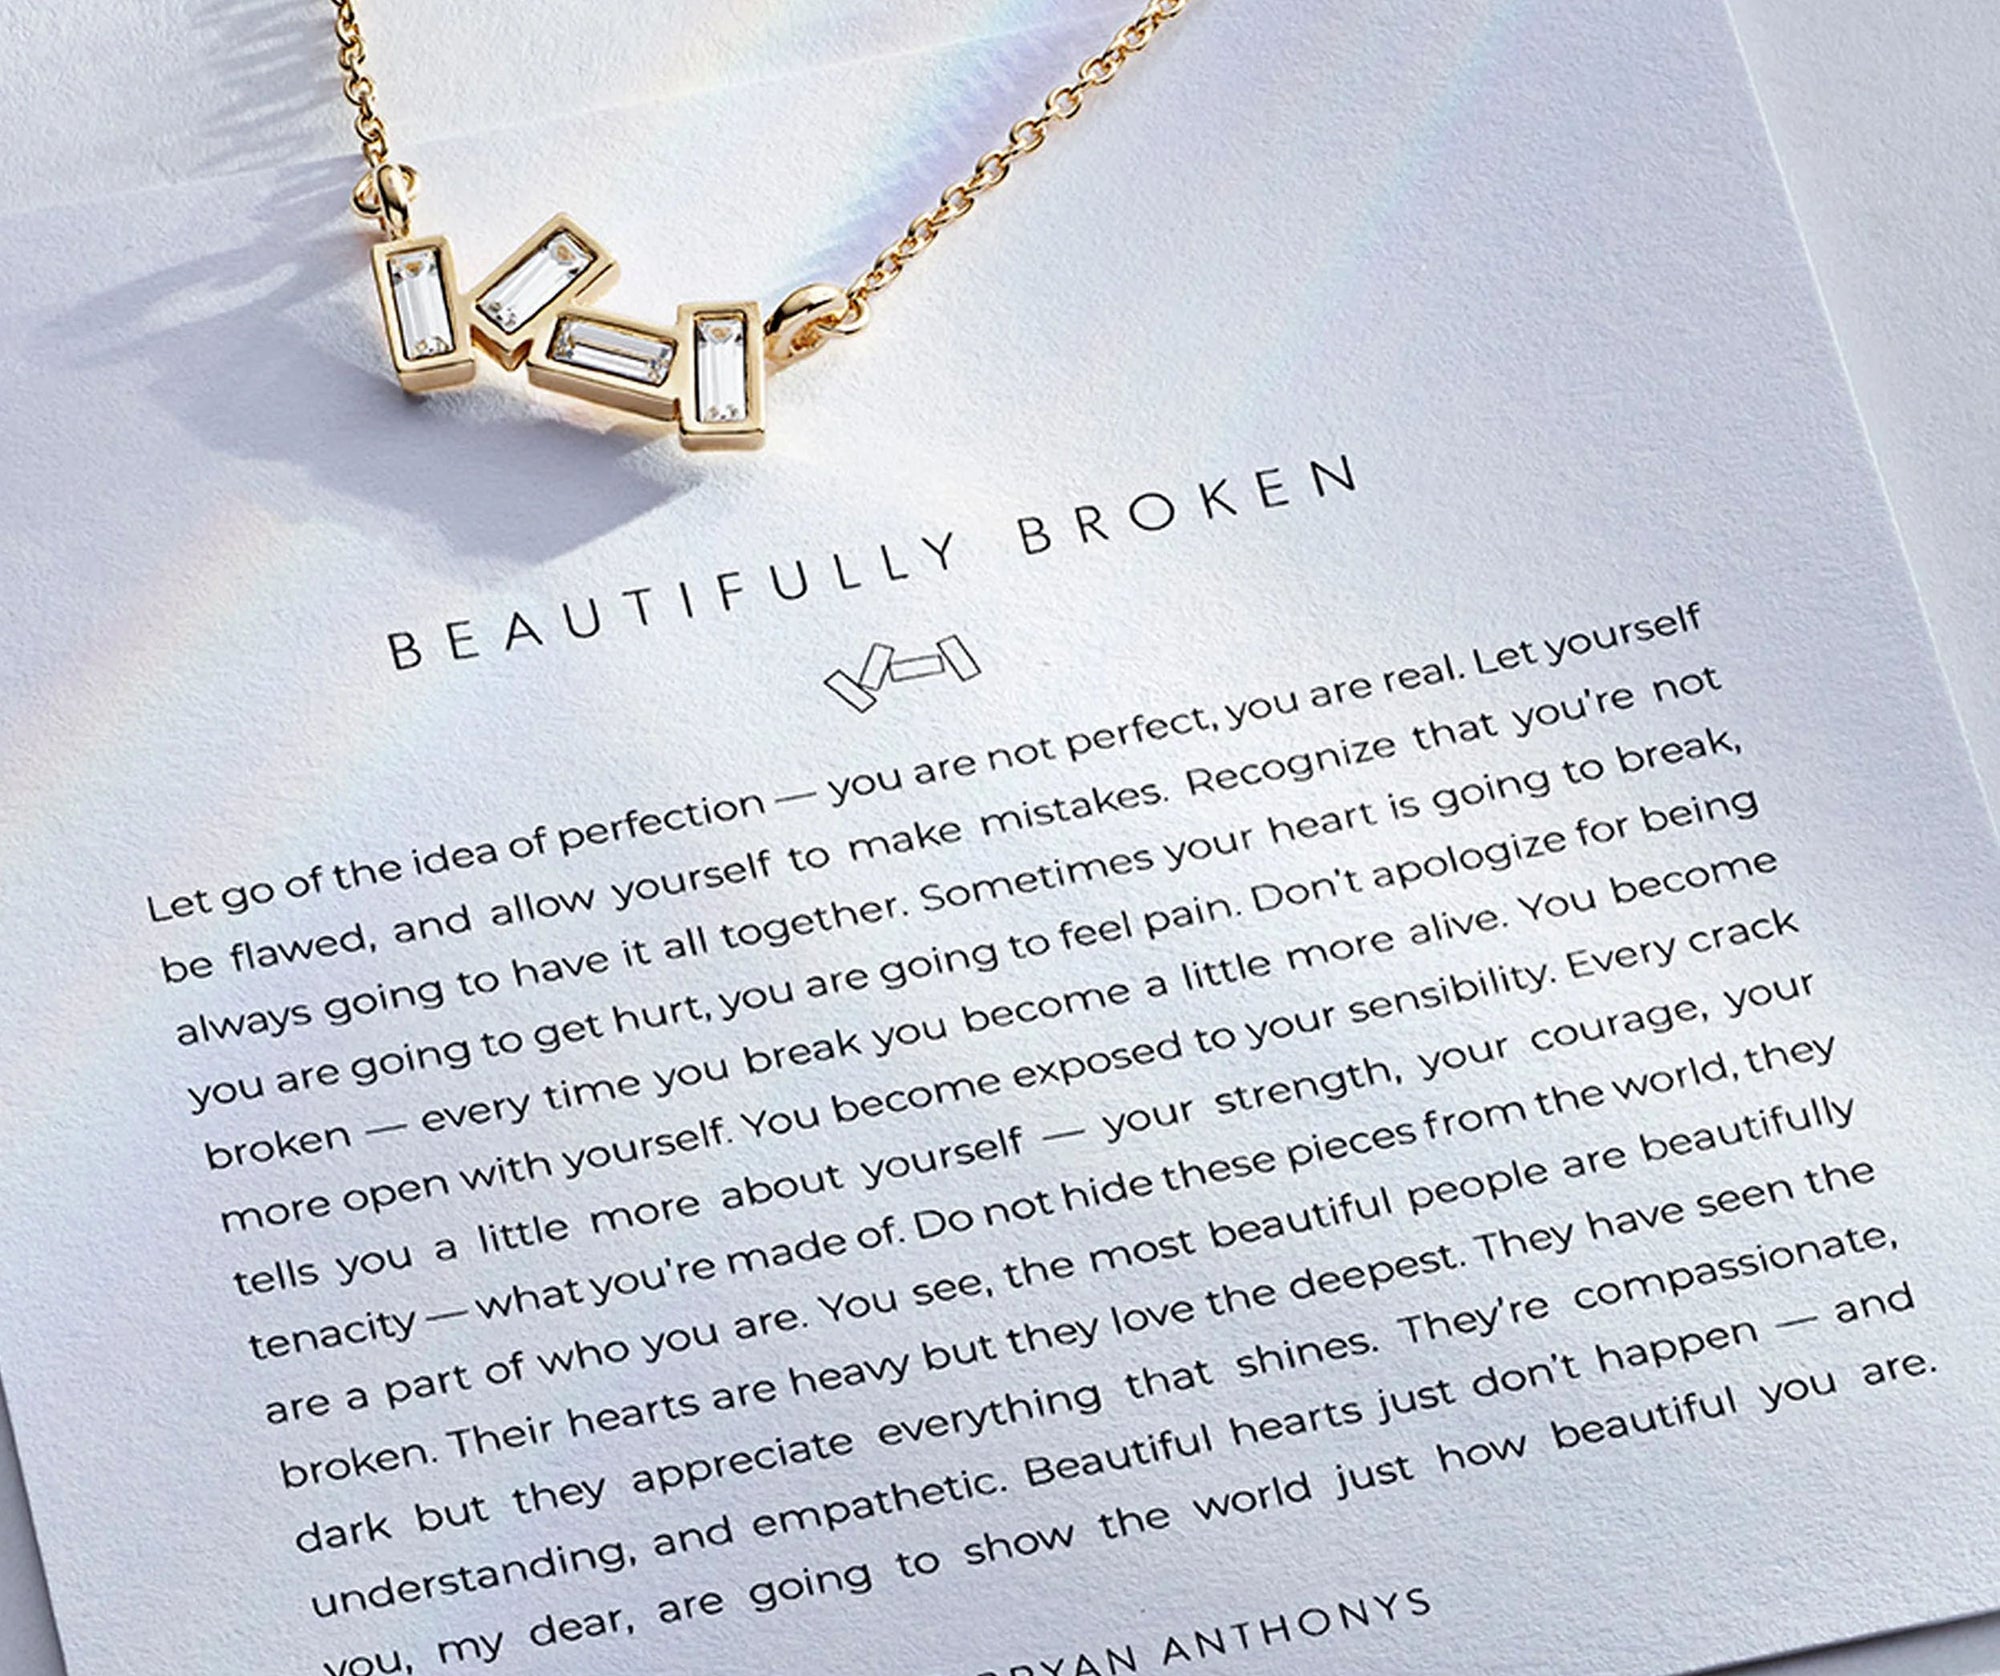 Beautifully broken necklace on card